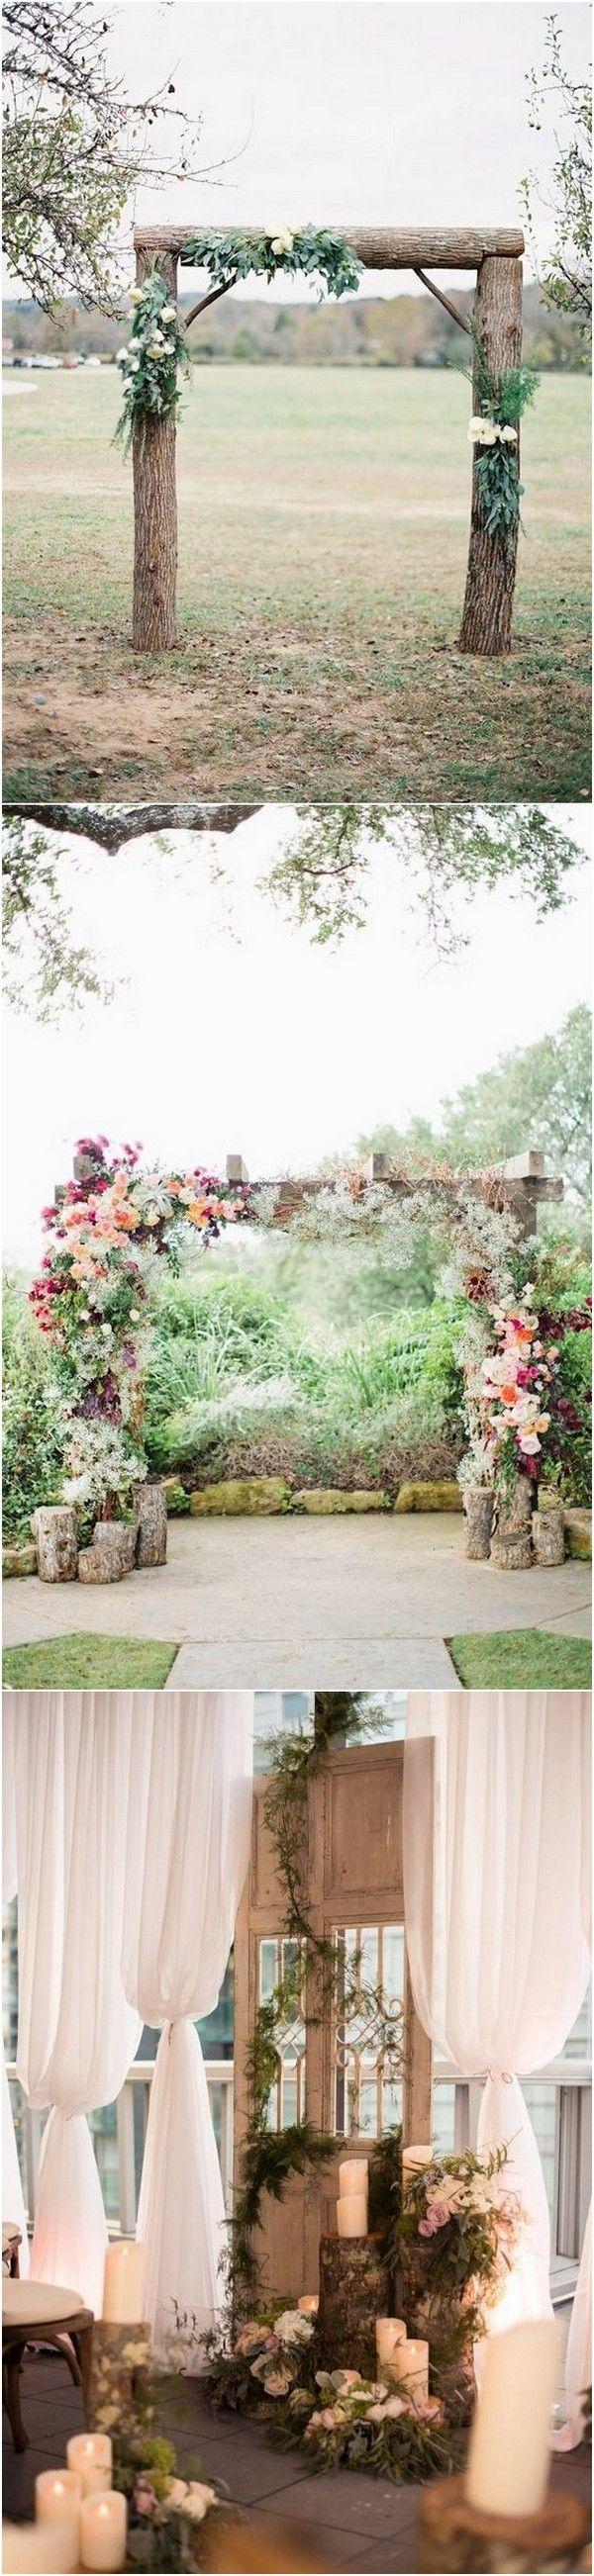 Mariage - 28 Country Rustic Wedding Decoration Ideas With Tree Stumps - Page 4 Of 4